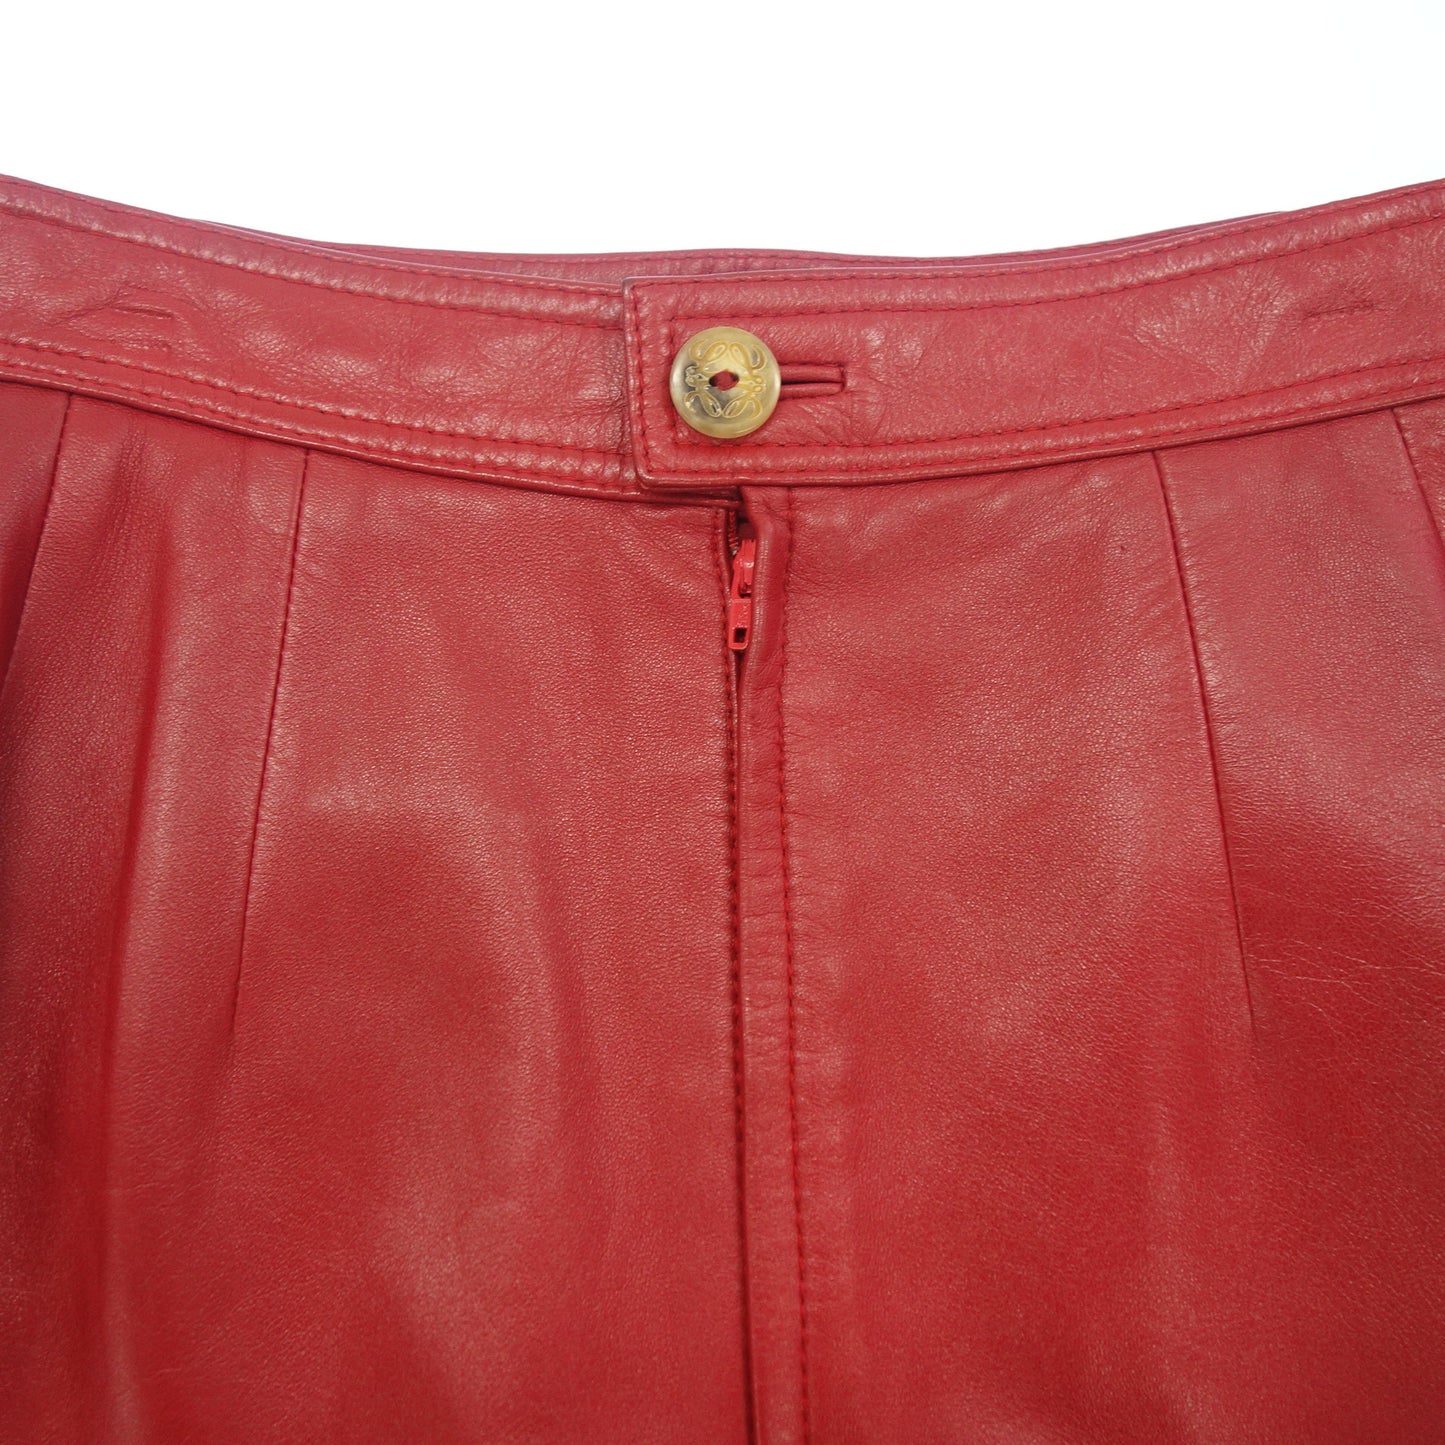 Used LOEWE Leather Skirt Anagram Nappa Leather Women's Red Size 38 LOEWE [AFB42] 